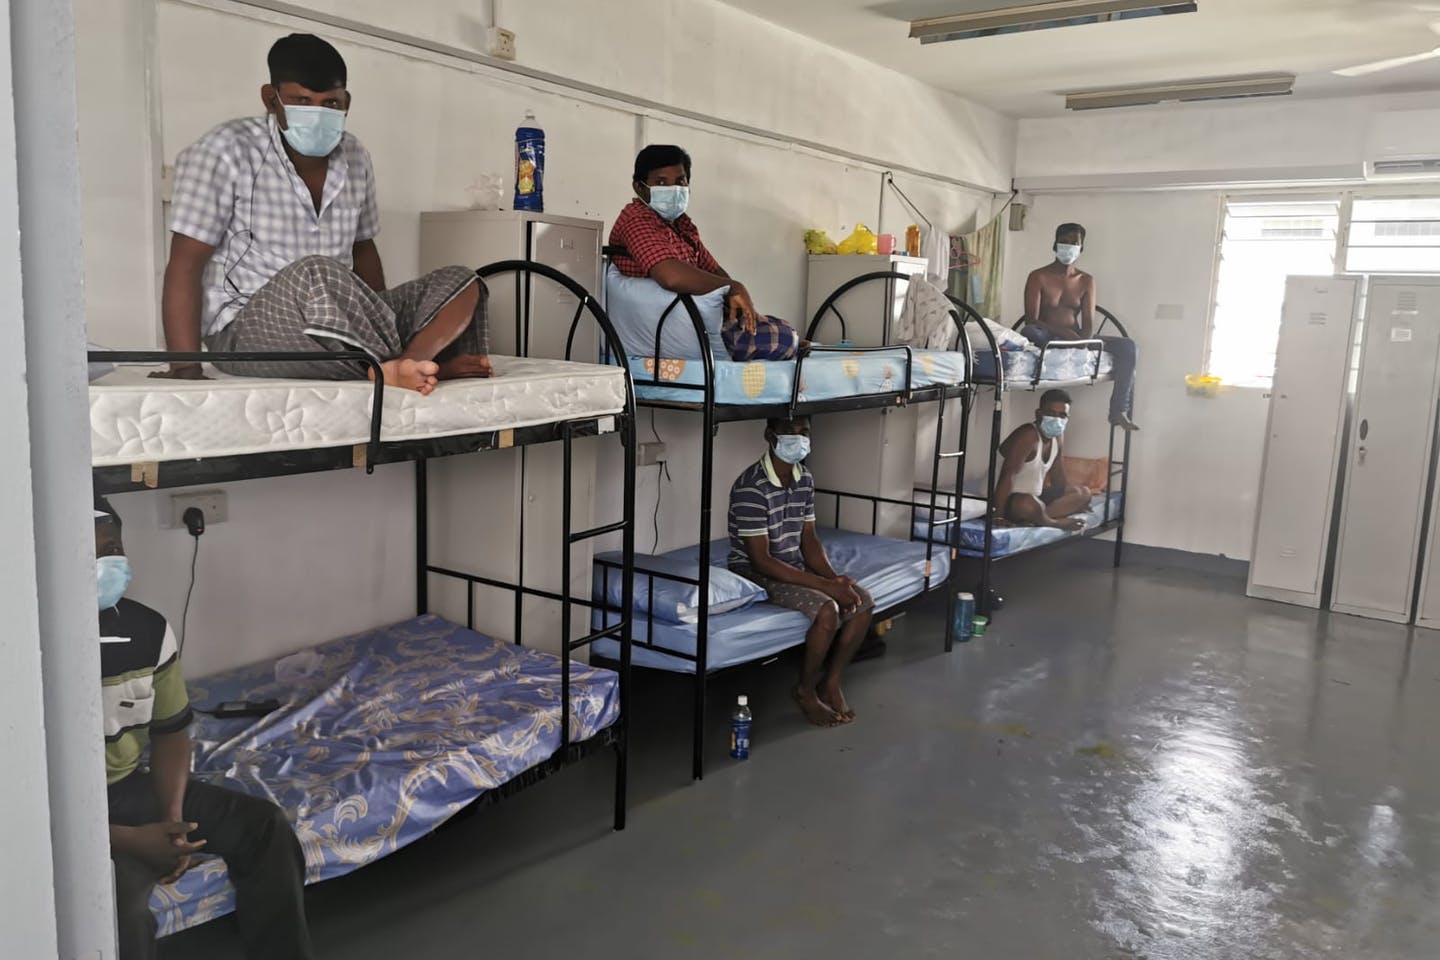 MOH PUTS 800 WORKERS UNDER QUARANTINE AGAIN AS NEW COVID-19 CASES WERE FOUND IN 'CLEARED' DORMITORY